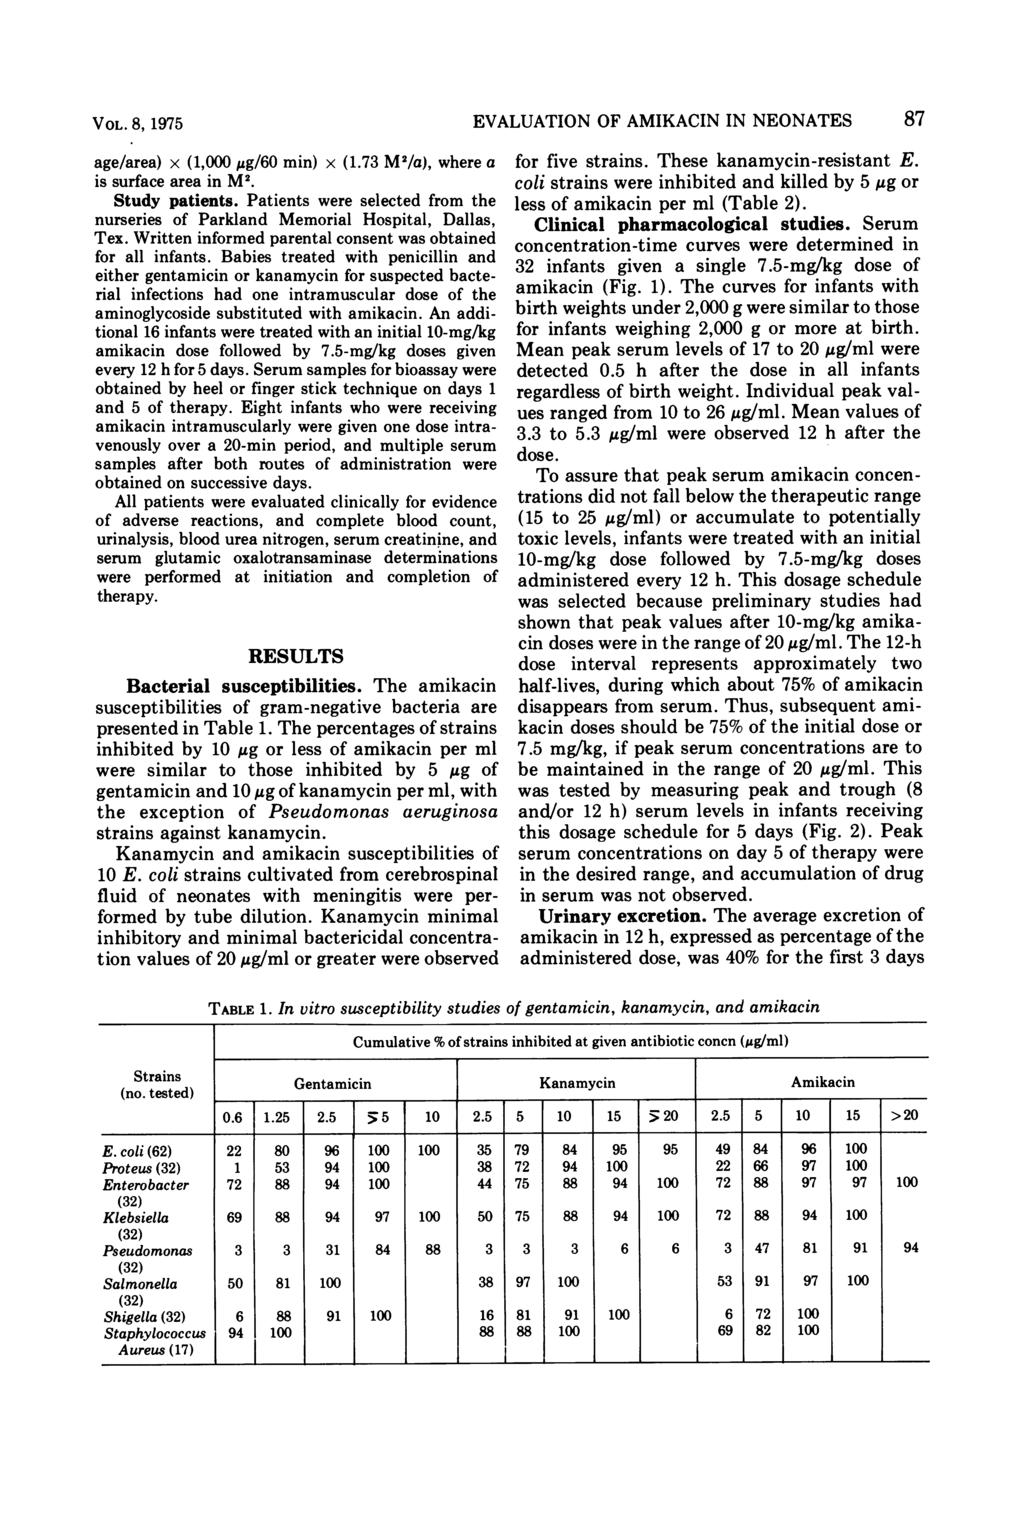 VOL. 8, 1975 RESULTS Bacterial susceptibilities. The amikacin susceptibilities of gram-negative bacteria are presented in Table 1.